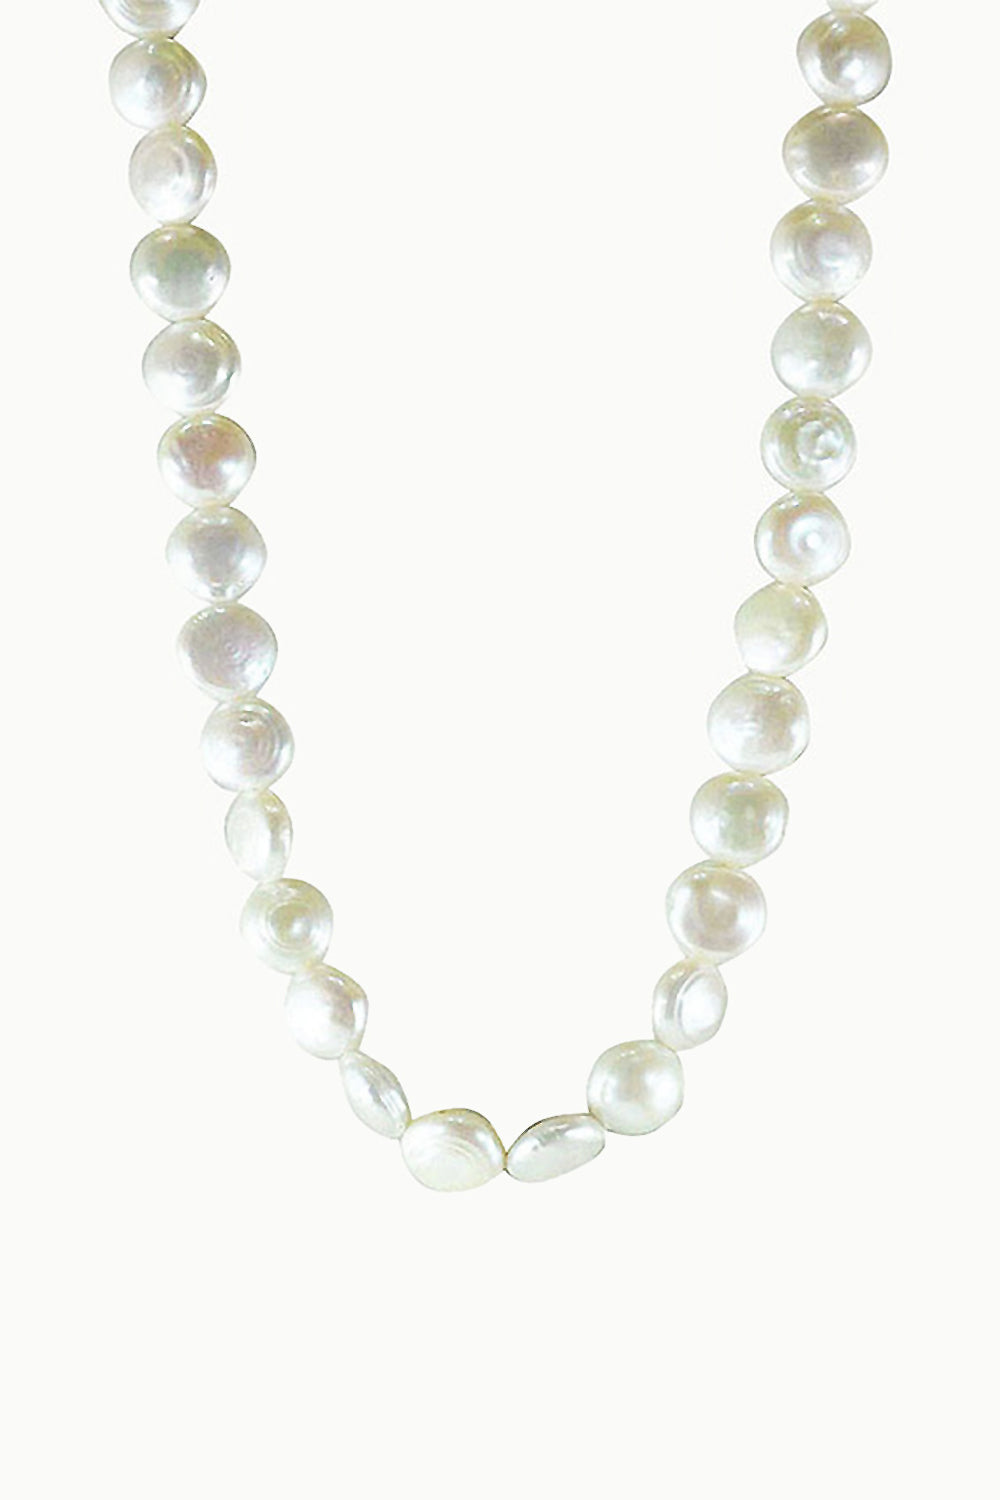 Sivalya Sienna Natural Coin Pearls Necklace